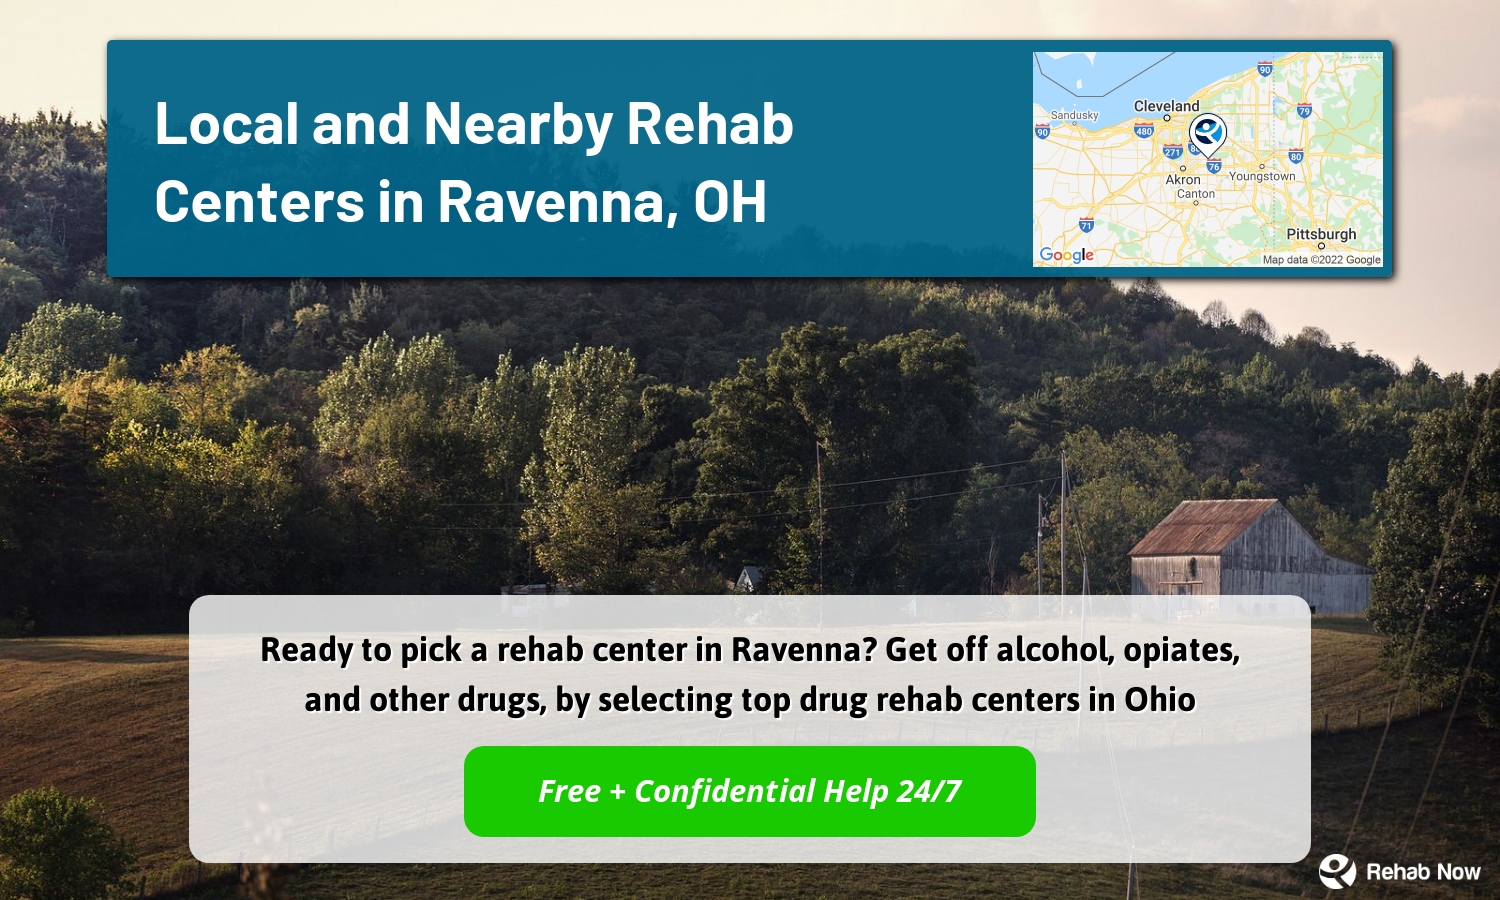 Ready to pick a rehab center in Ravenna? Get off alcohol, opiates, and other drugs, by selecting top drug rehab centers in Ohio